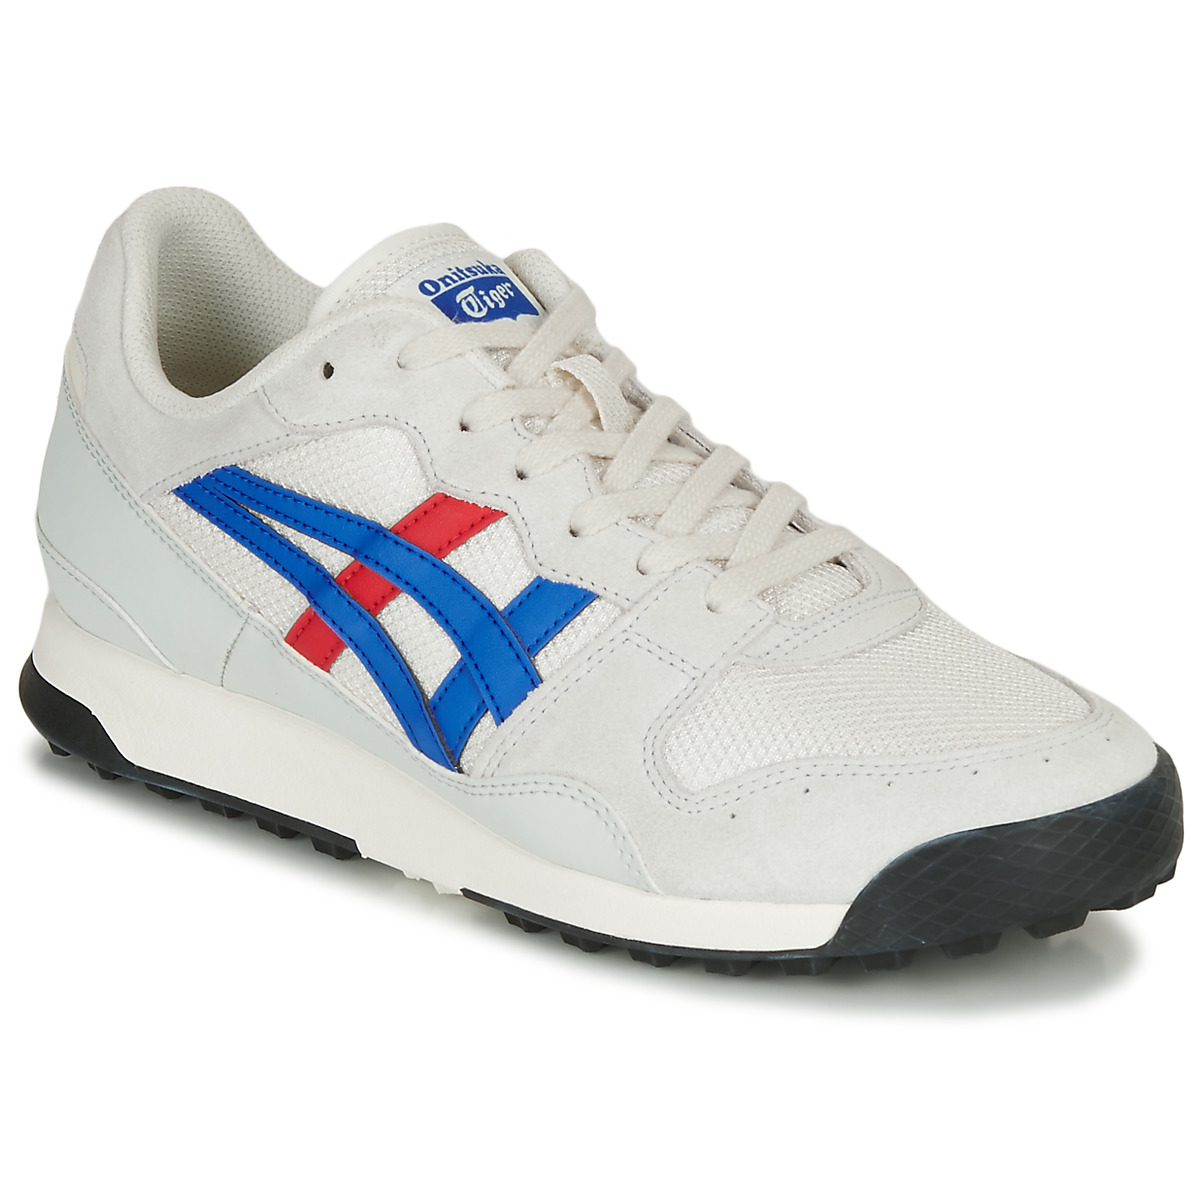 Xαμηλά Sneakers Onitsuka Tiger TIGER HORIZONIA Ύφασμα